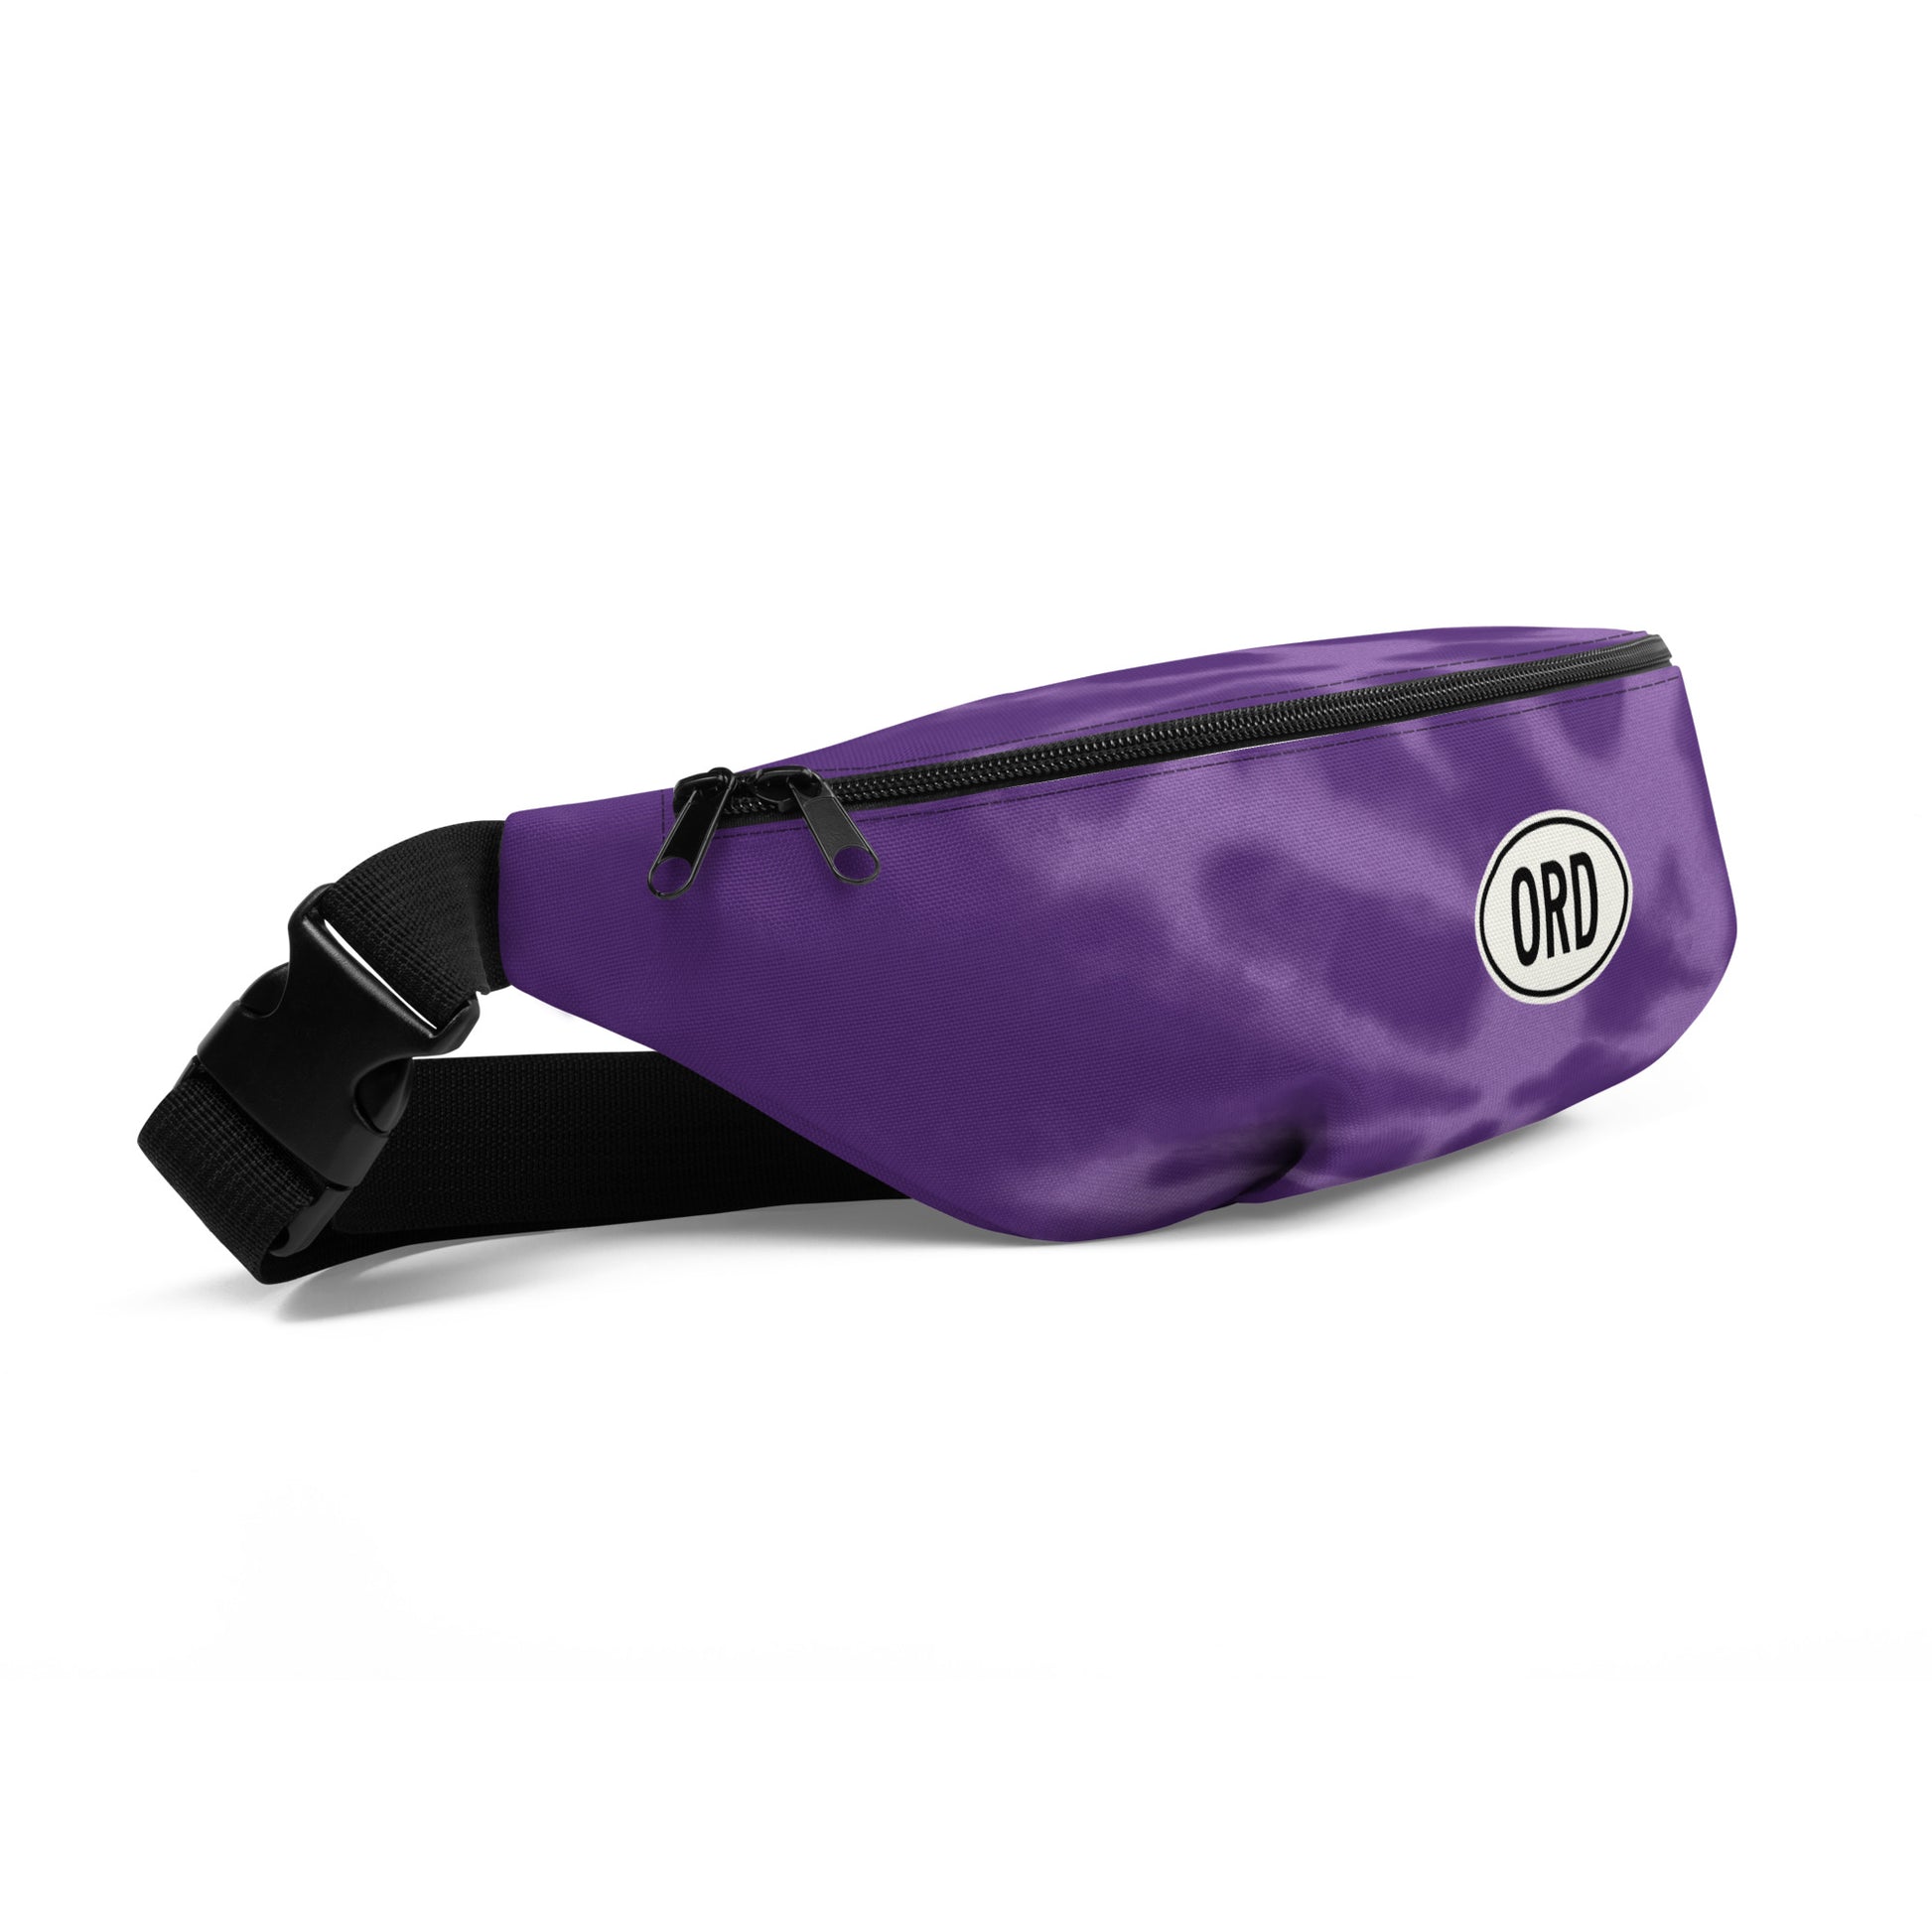 Travel Gift Fanny Pack - Purple Tie-Dye • ORD Chicago • YHM Designs - Image 07